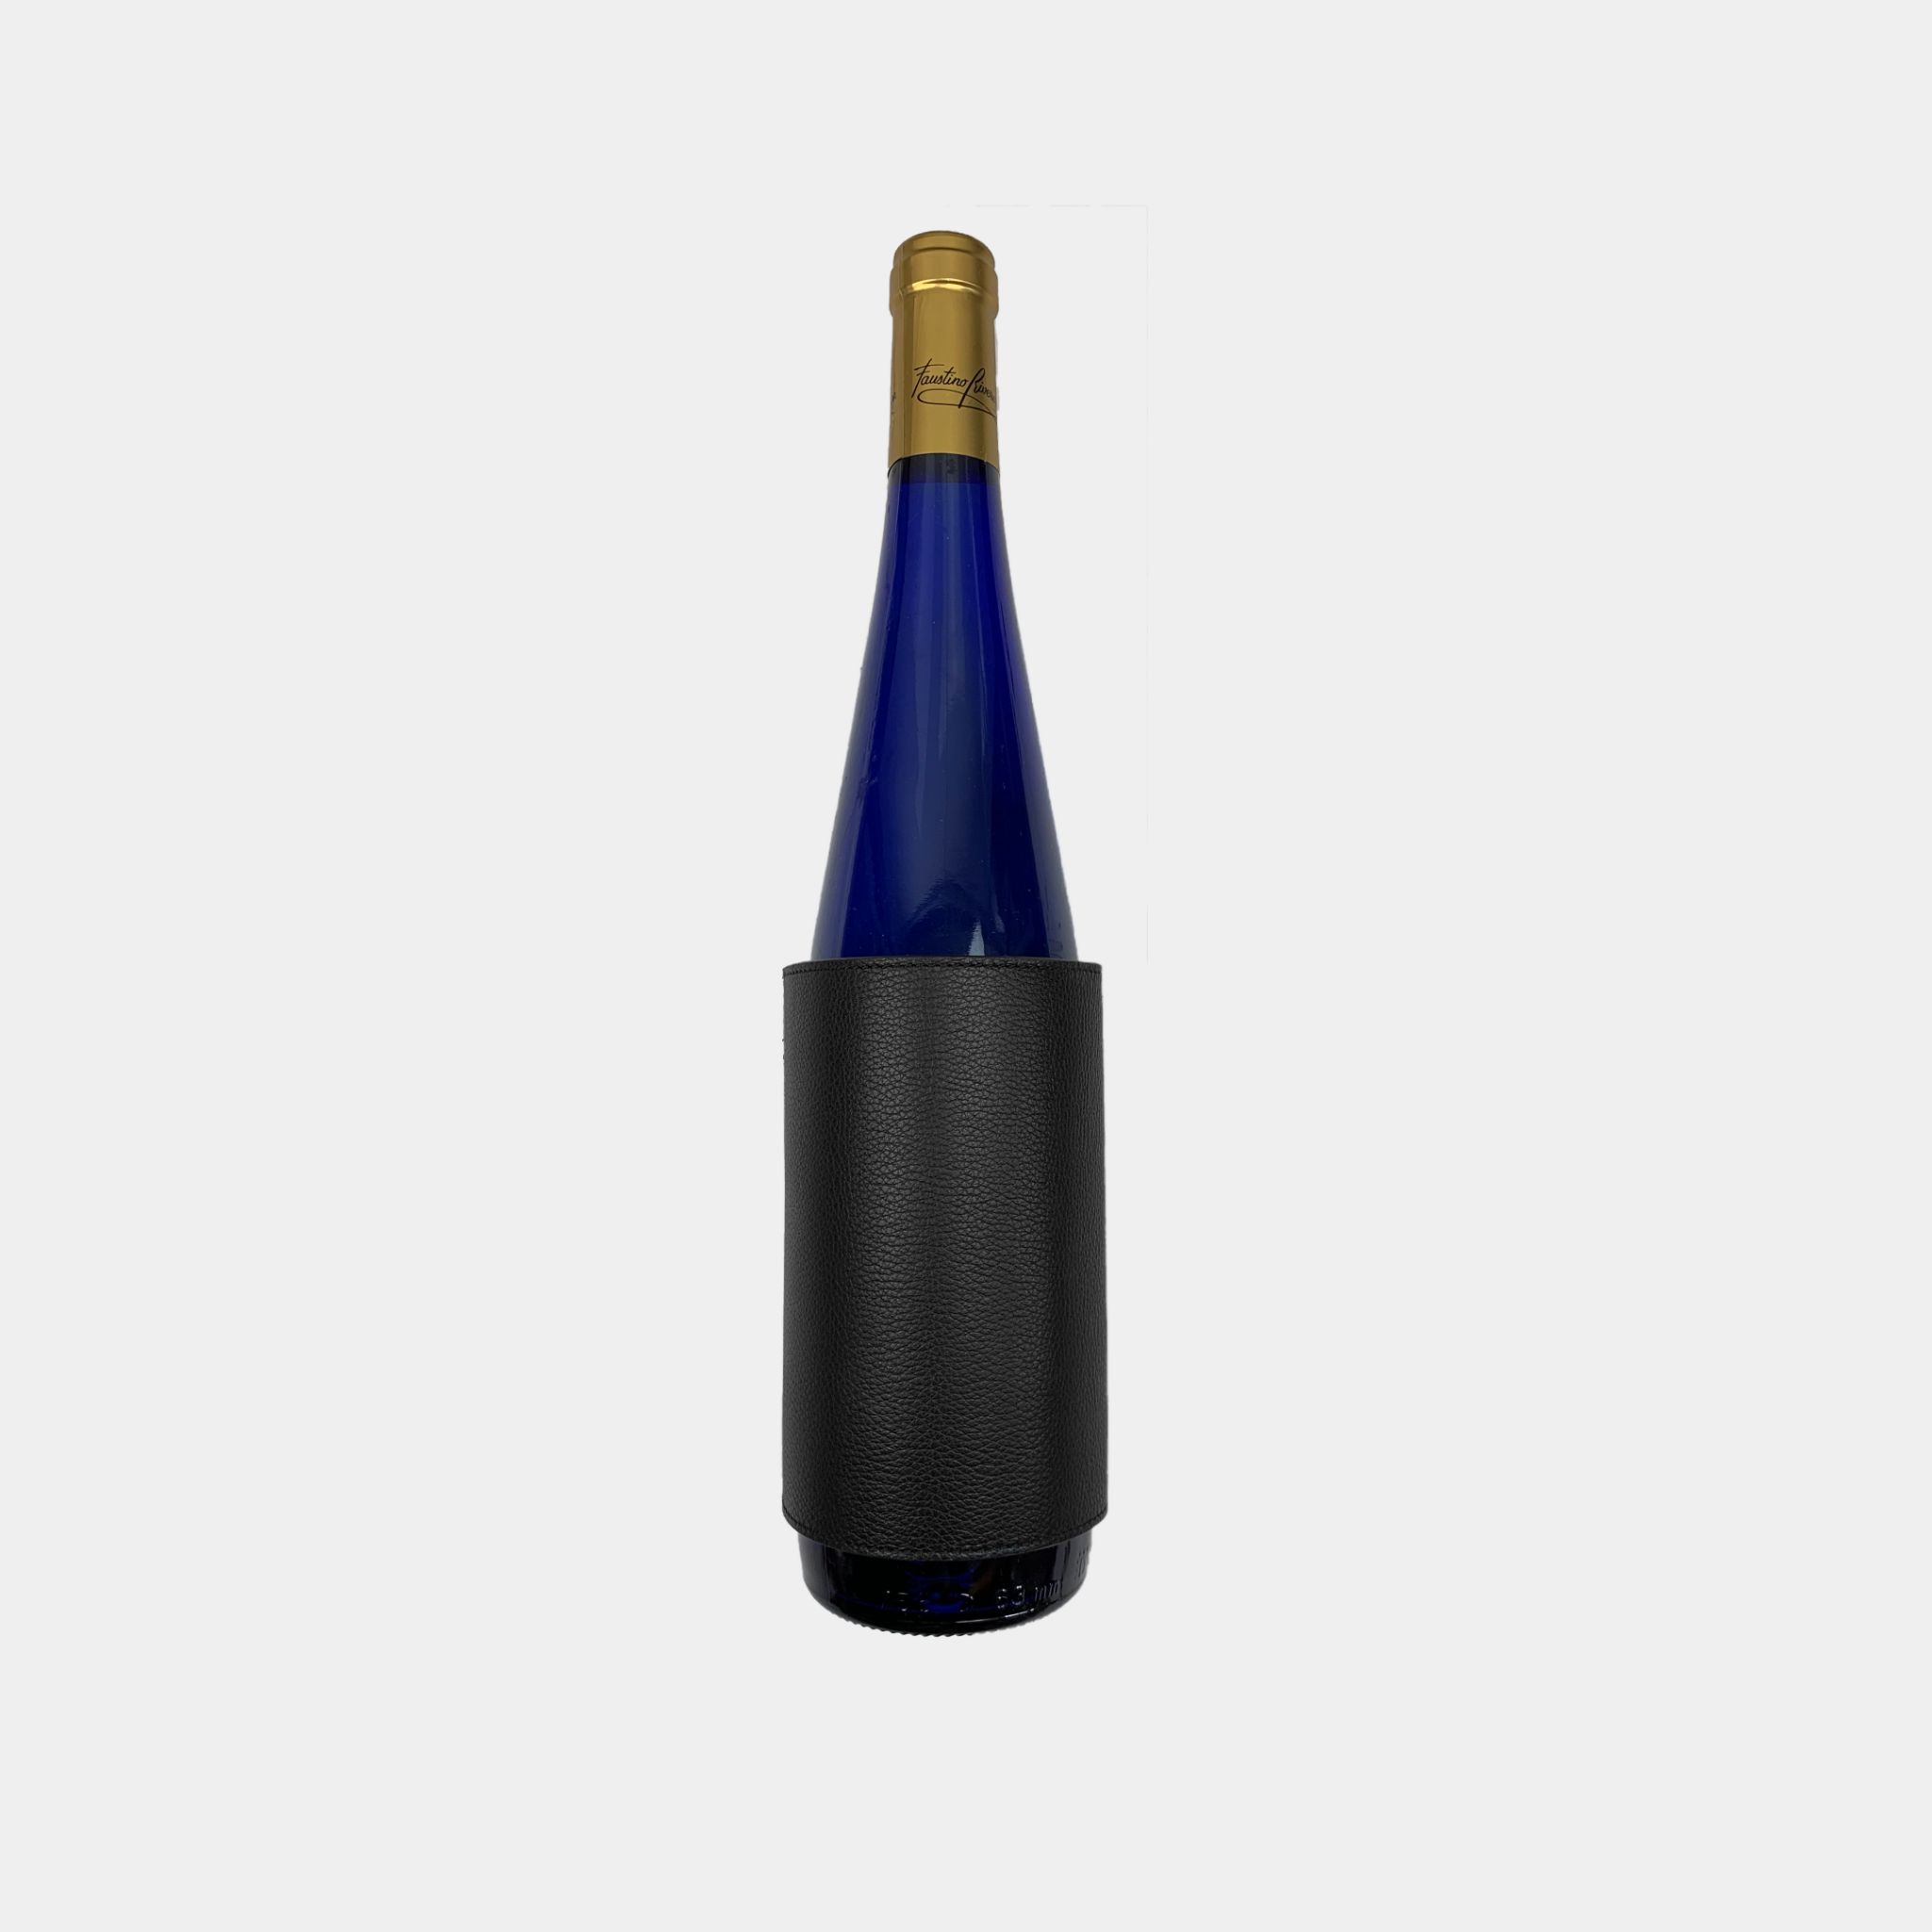 Custom made leather bottle sleeve for wine and champagne, embossed with your brands logo.